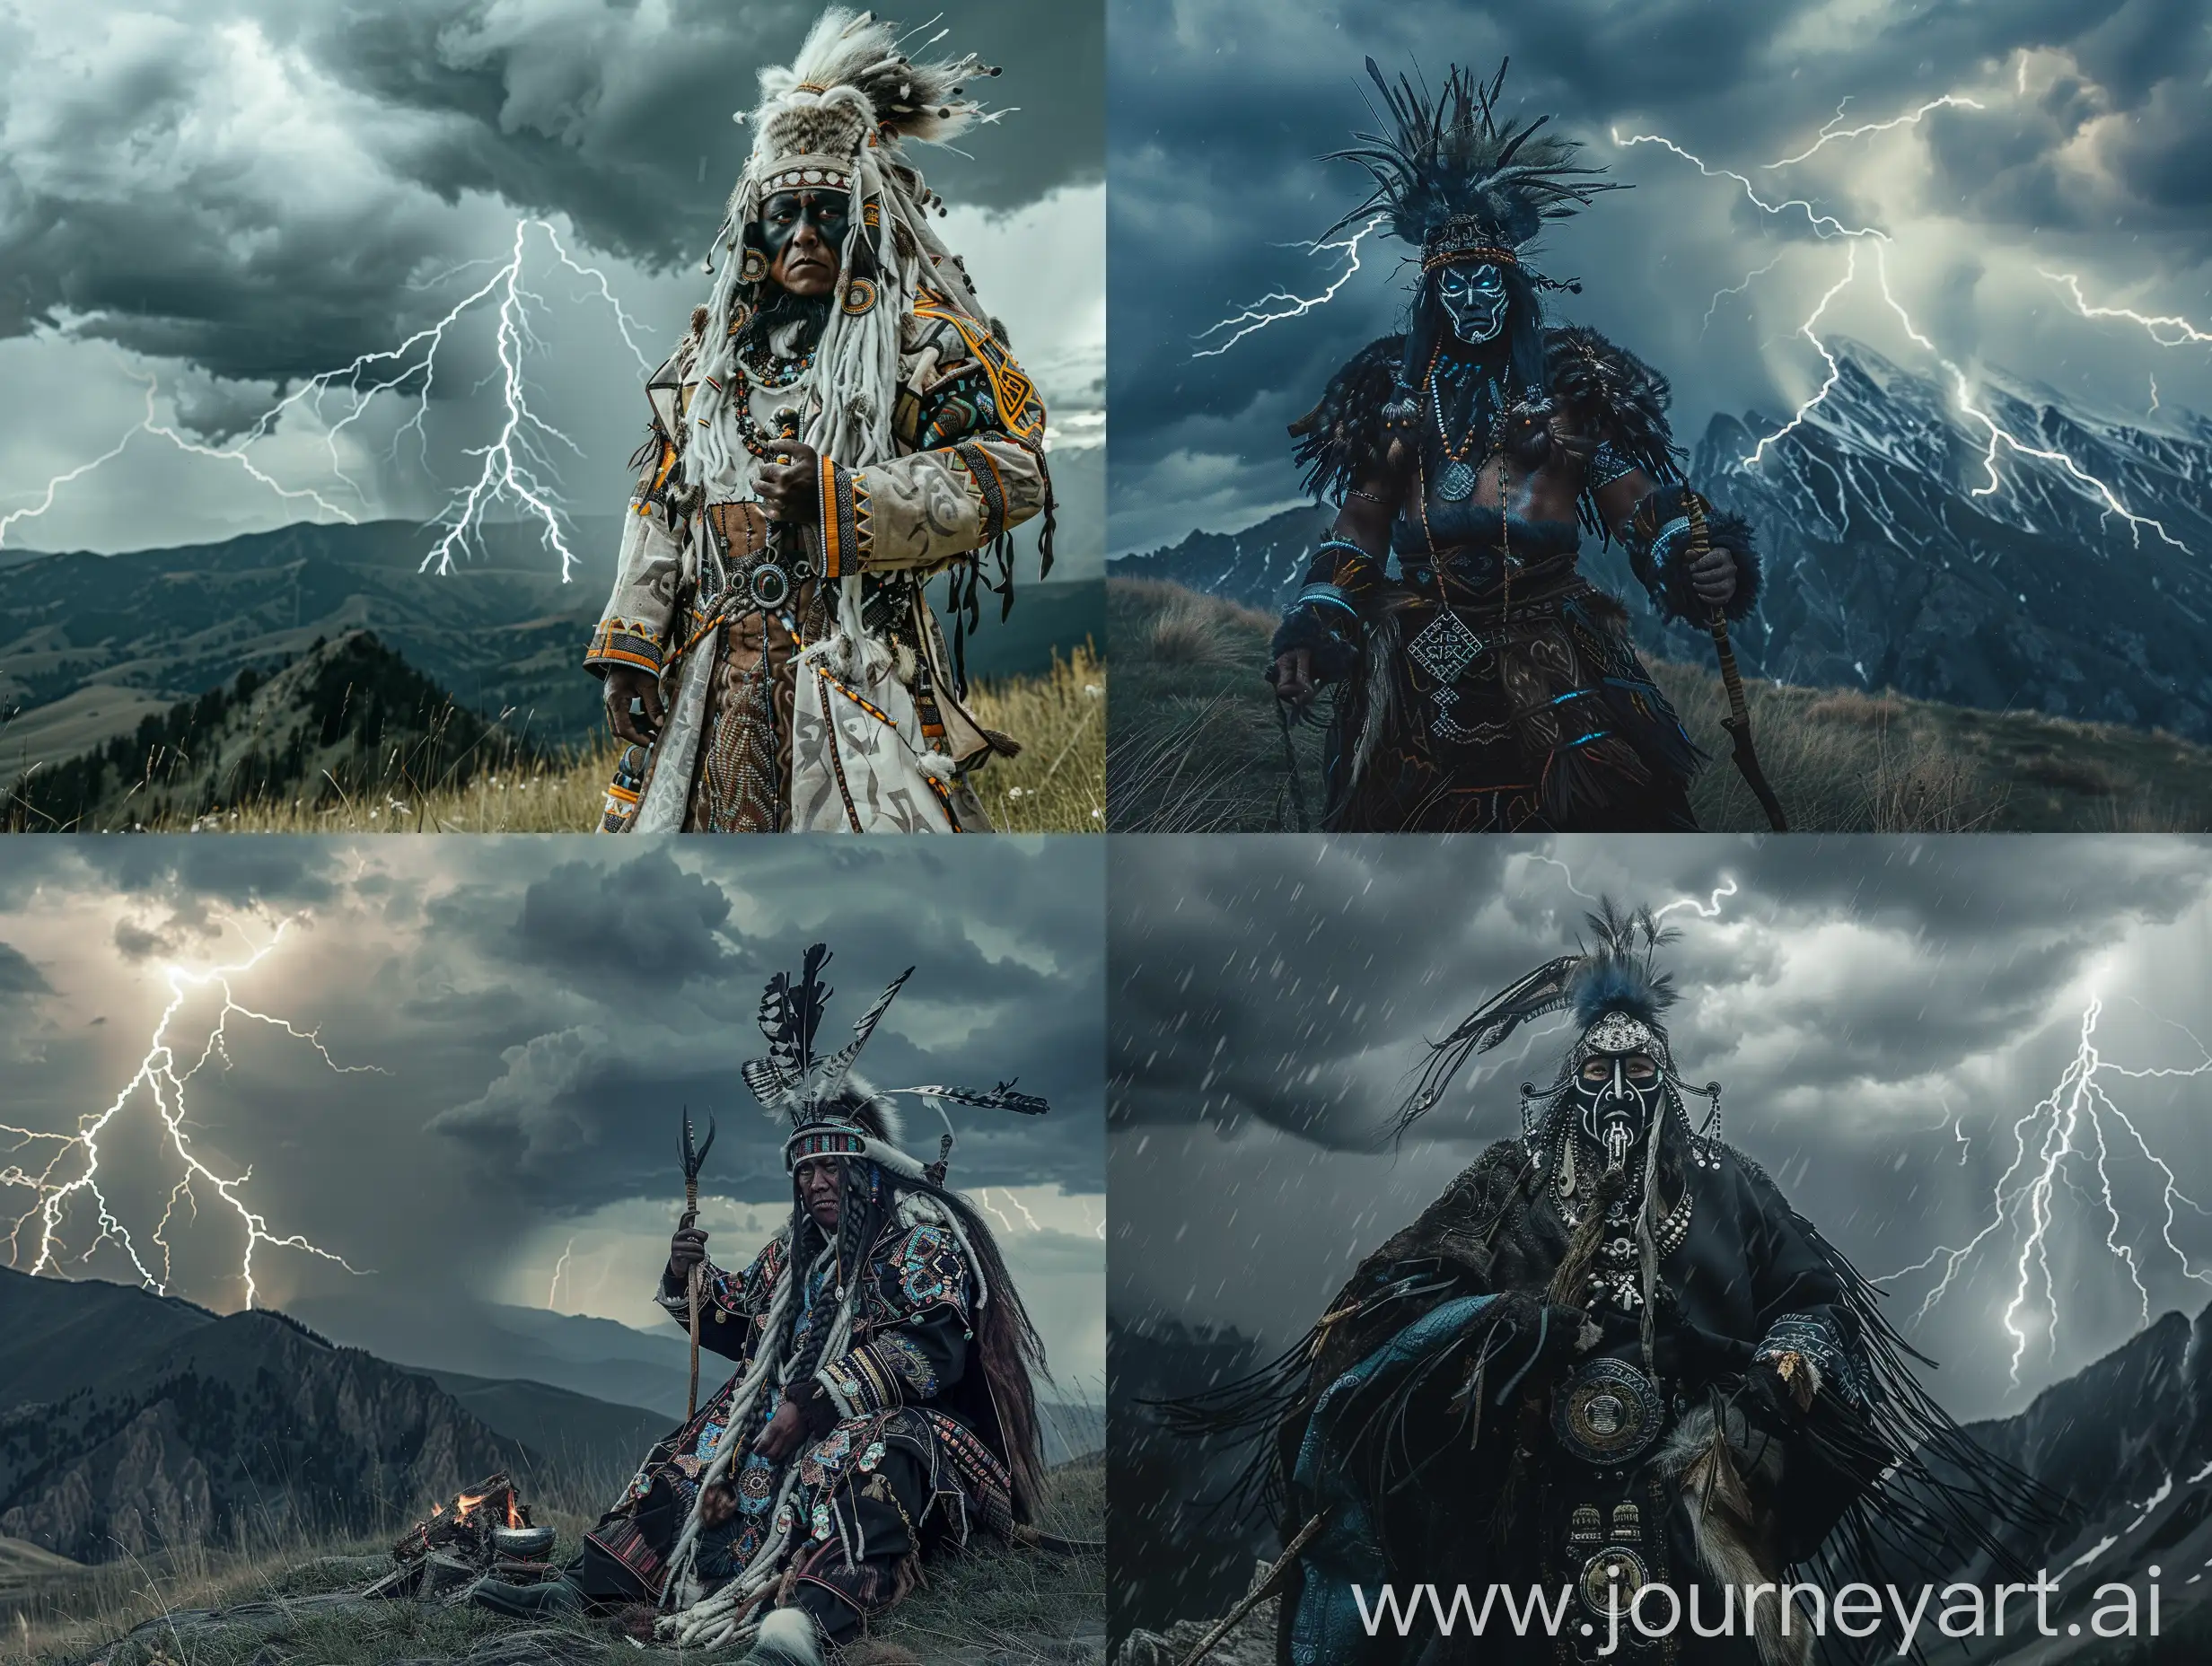 An evil dark mongolian shaman in his full shamanic outfit, has summoned a big storm with a lot of thunder in the mountains